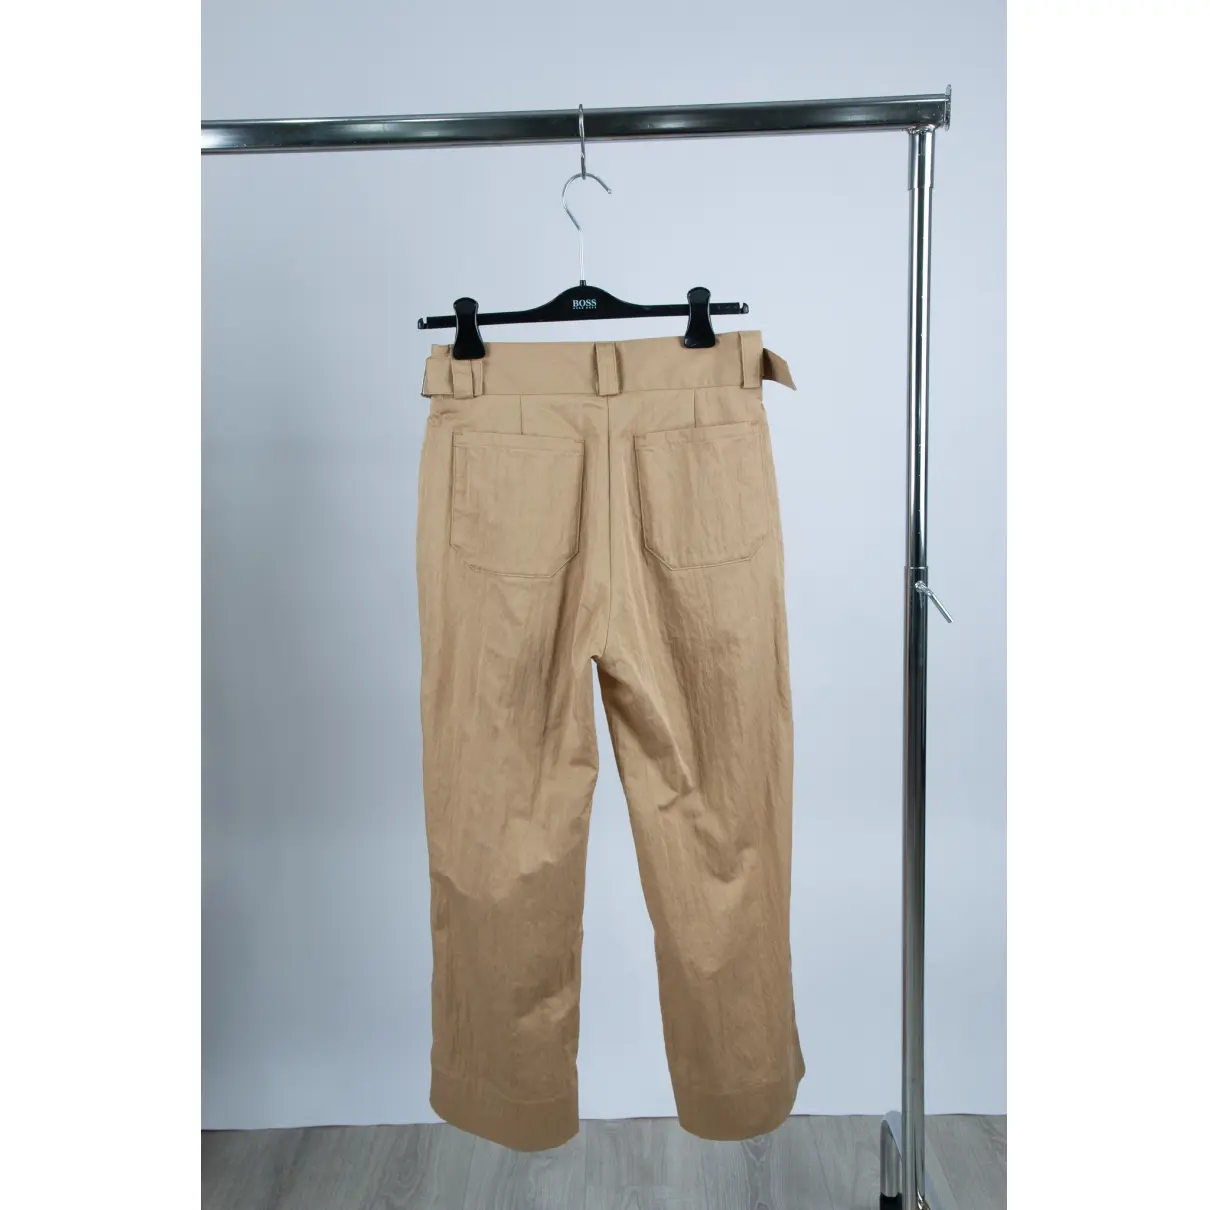 Buy Rodebjer Large pants online